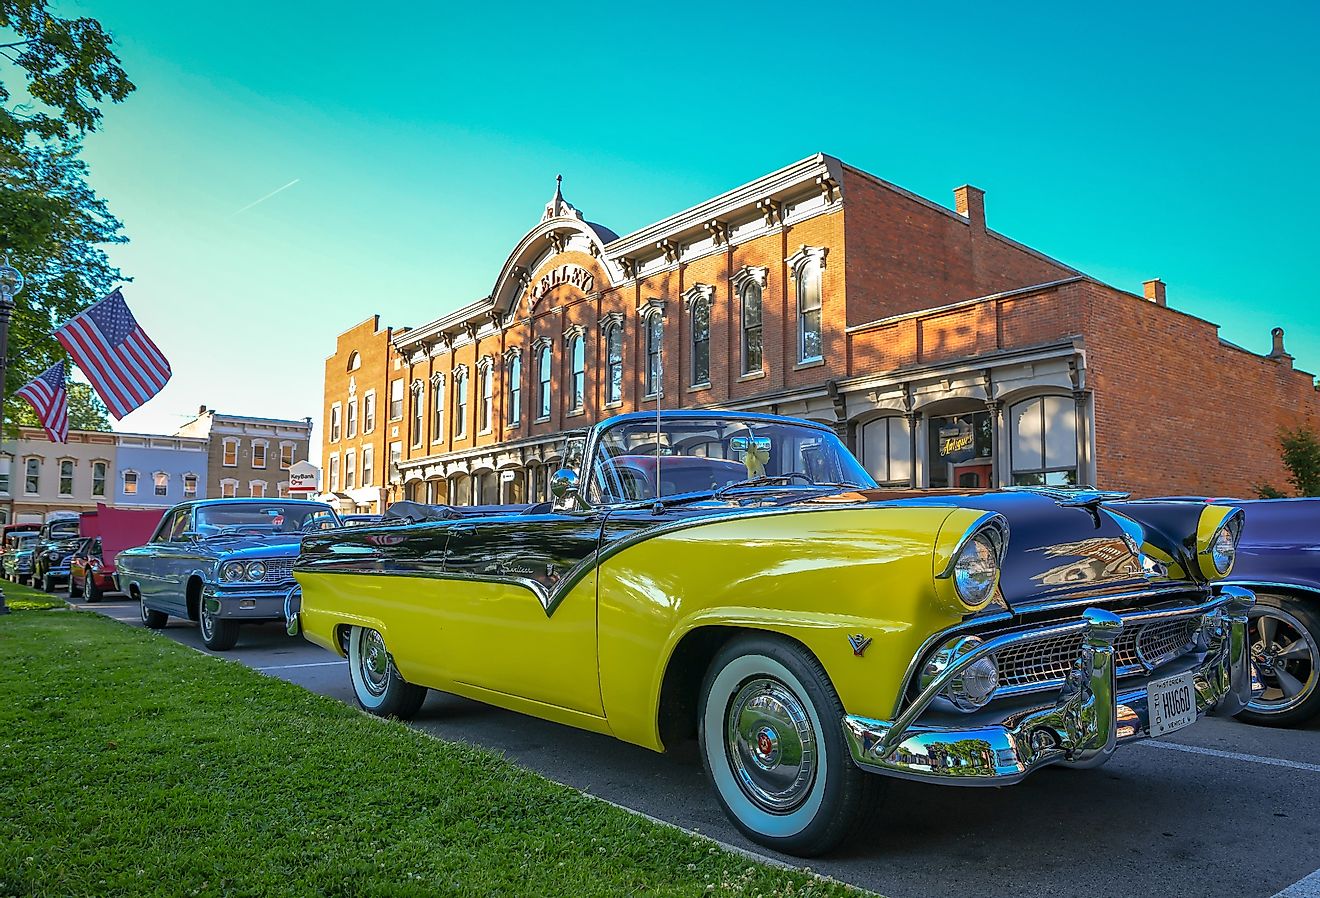 Classic Cars meet on the town square for cruisers night in Milan, Ohio. Image credit Keith J Finks via Shutterstock